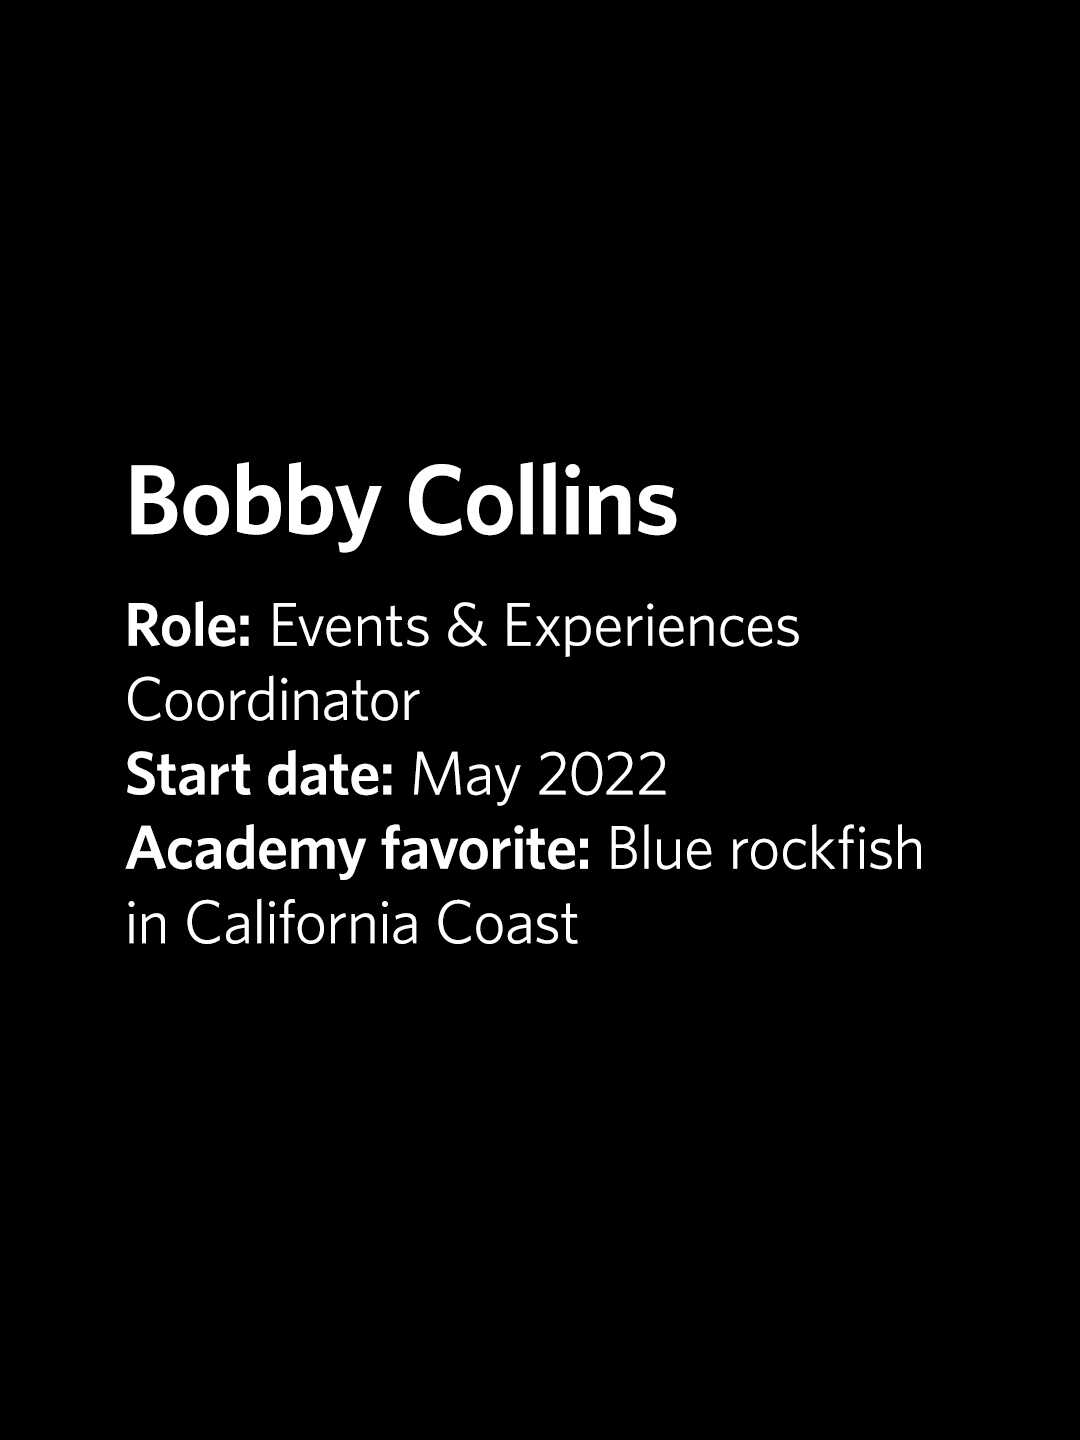 Bobby Collins, Events and Experiences Coordinator, started at Academy May 2022, Academy favorite is blue rockfish in Cal Coast